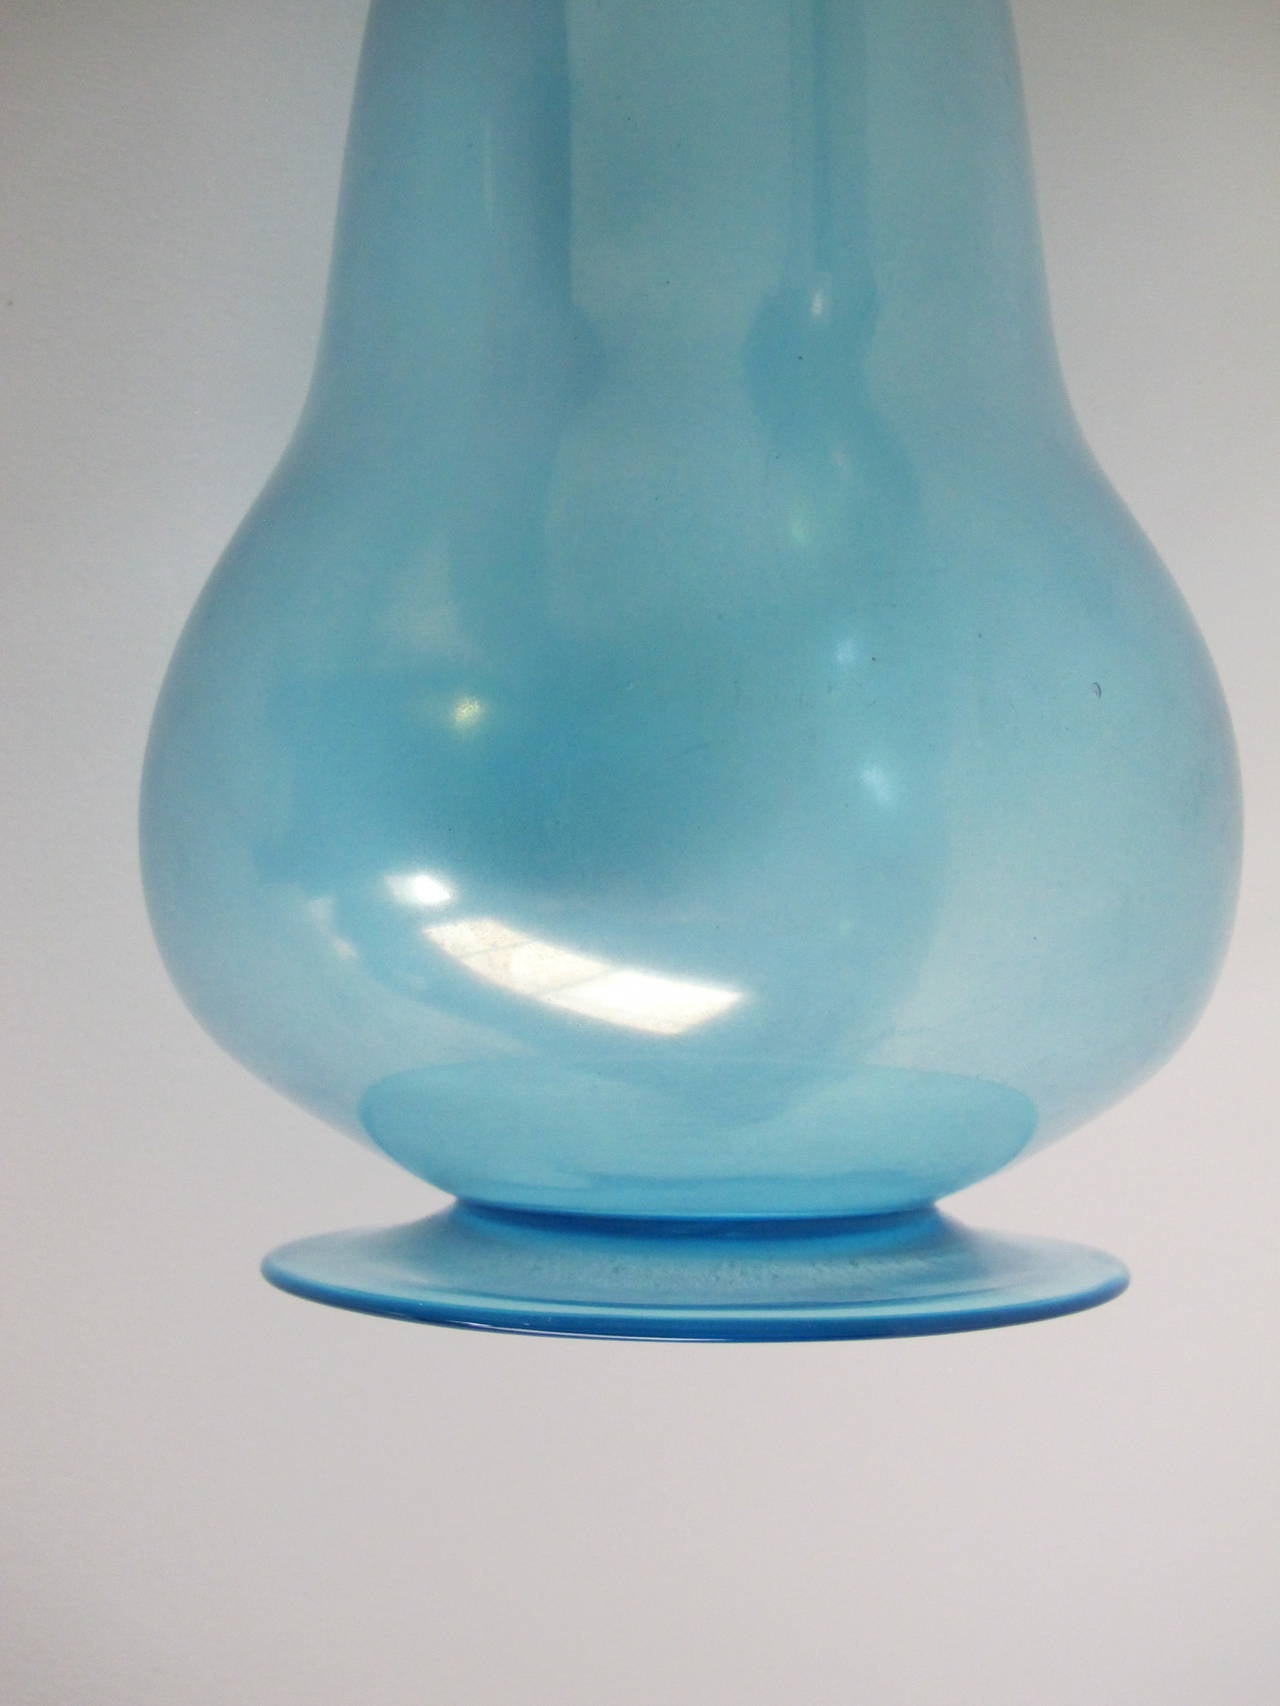 Early 20th Century Art Deco Glass Vase by Andries Dirk Copier, Leerdam Unica, 1920s For Sale